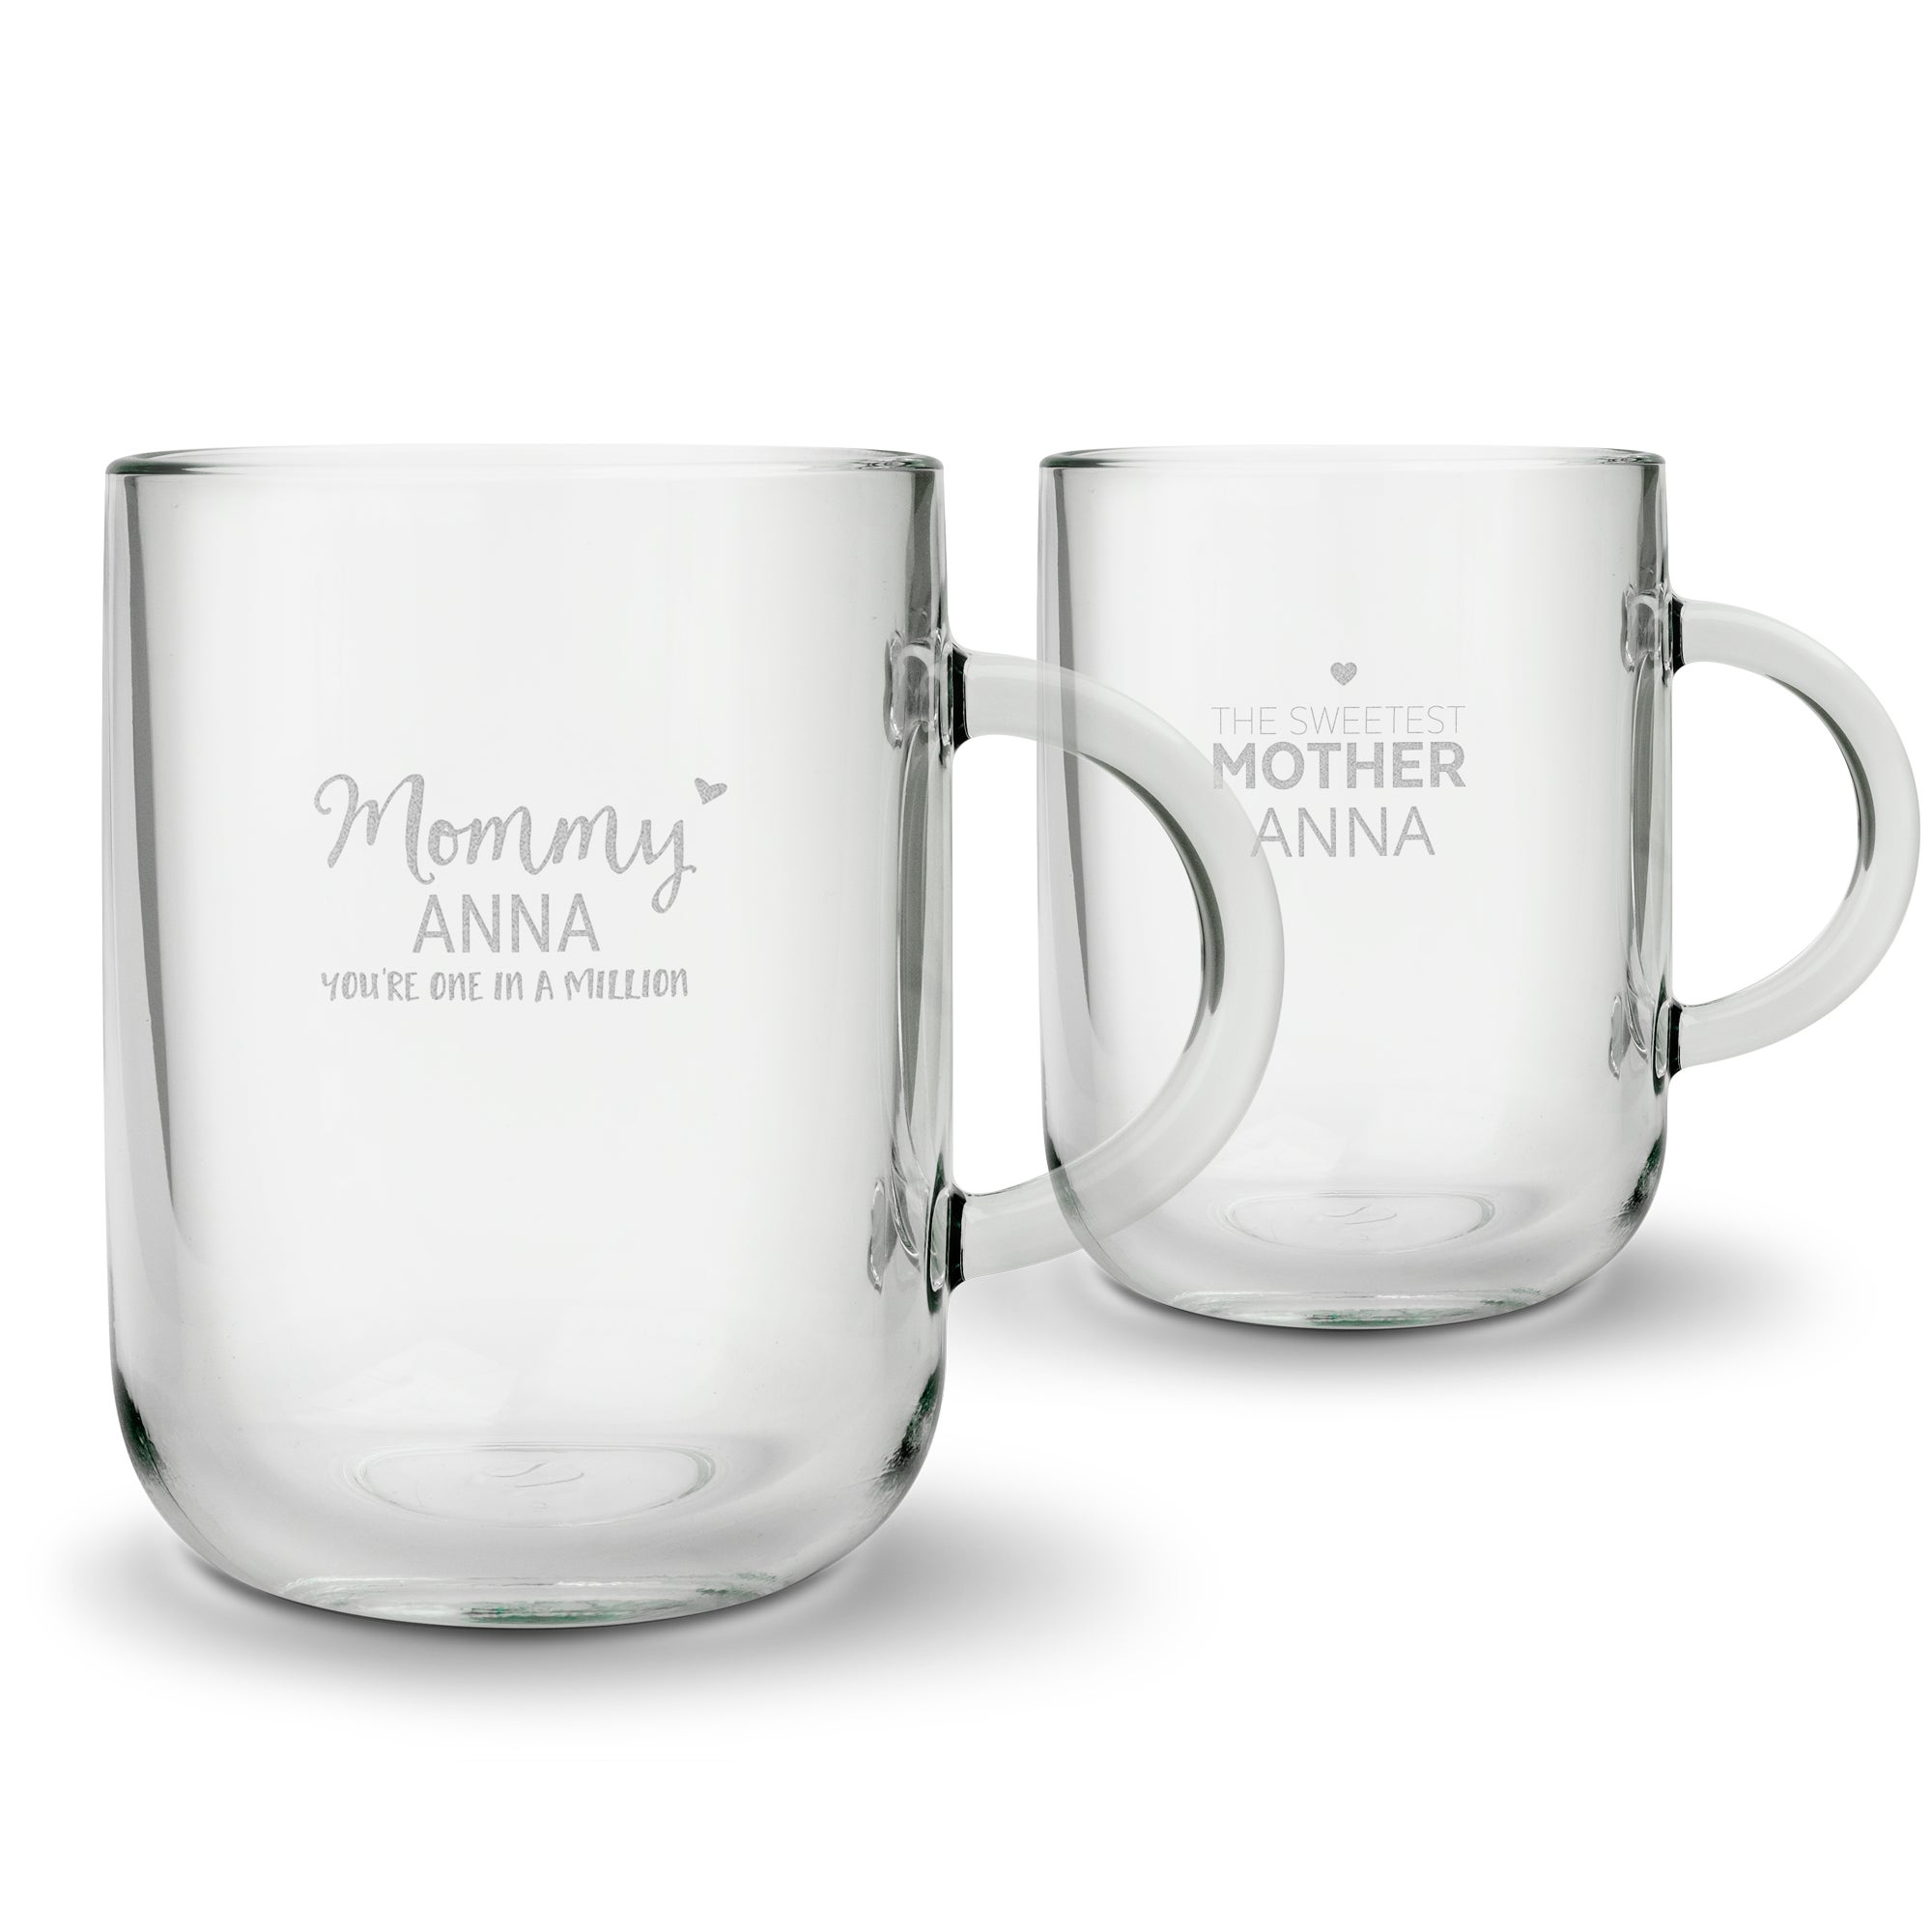 Personalised glass mug - Mother's Day - Round - 2 pcs - Engraved